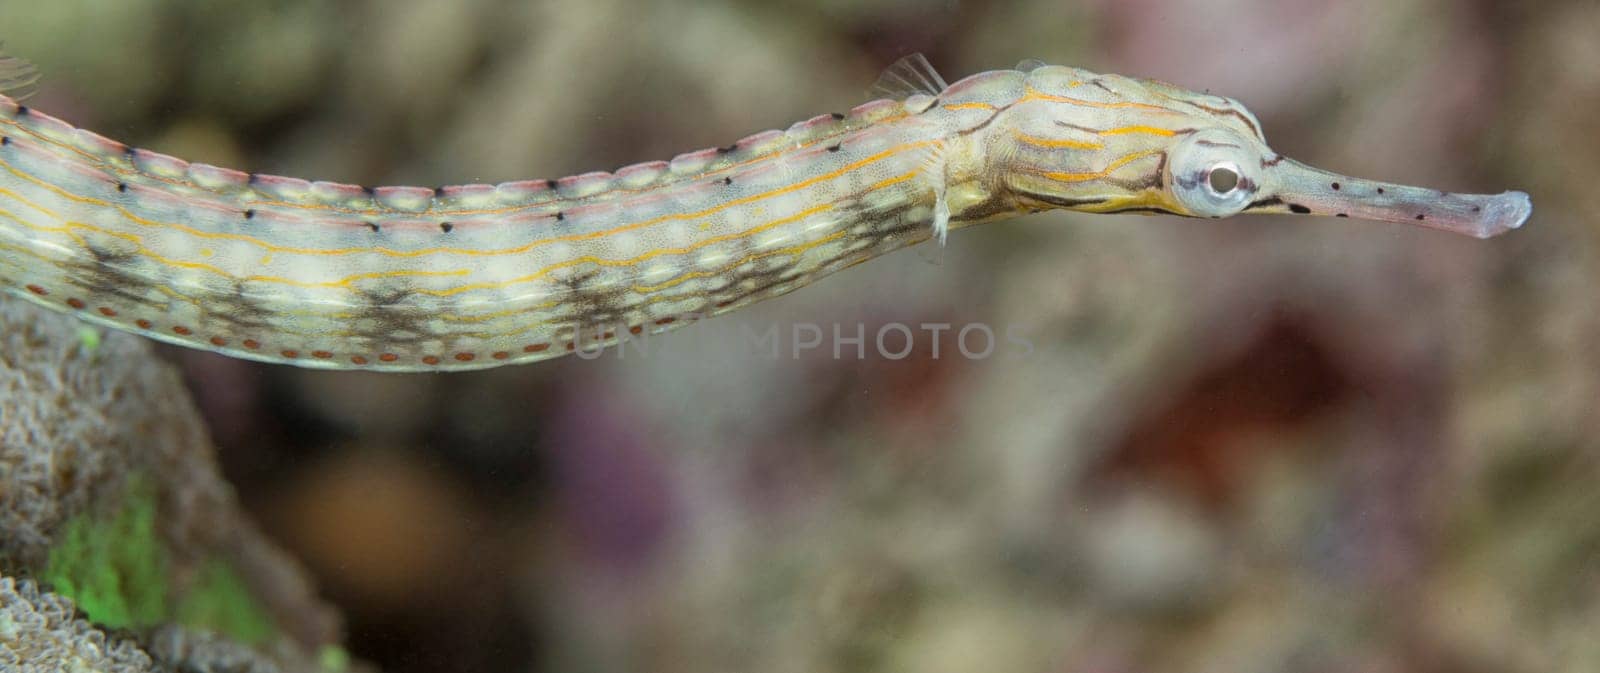 A pipe fish of sea horse family by AndreaIzzotti